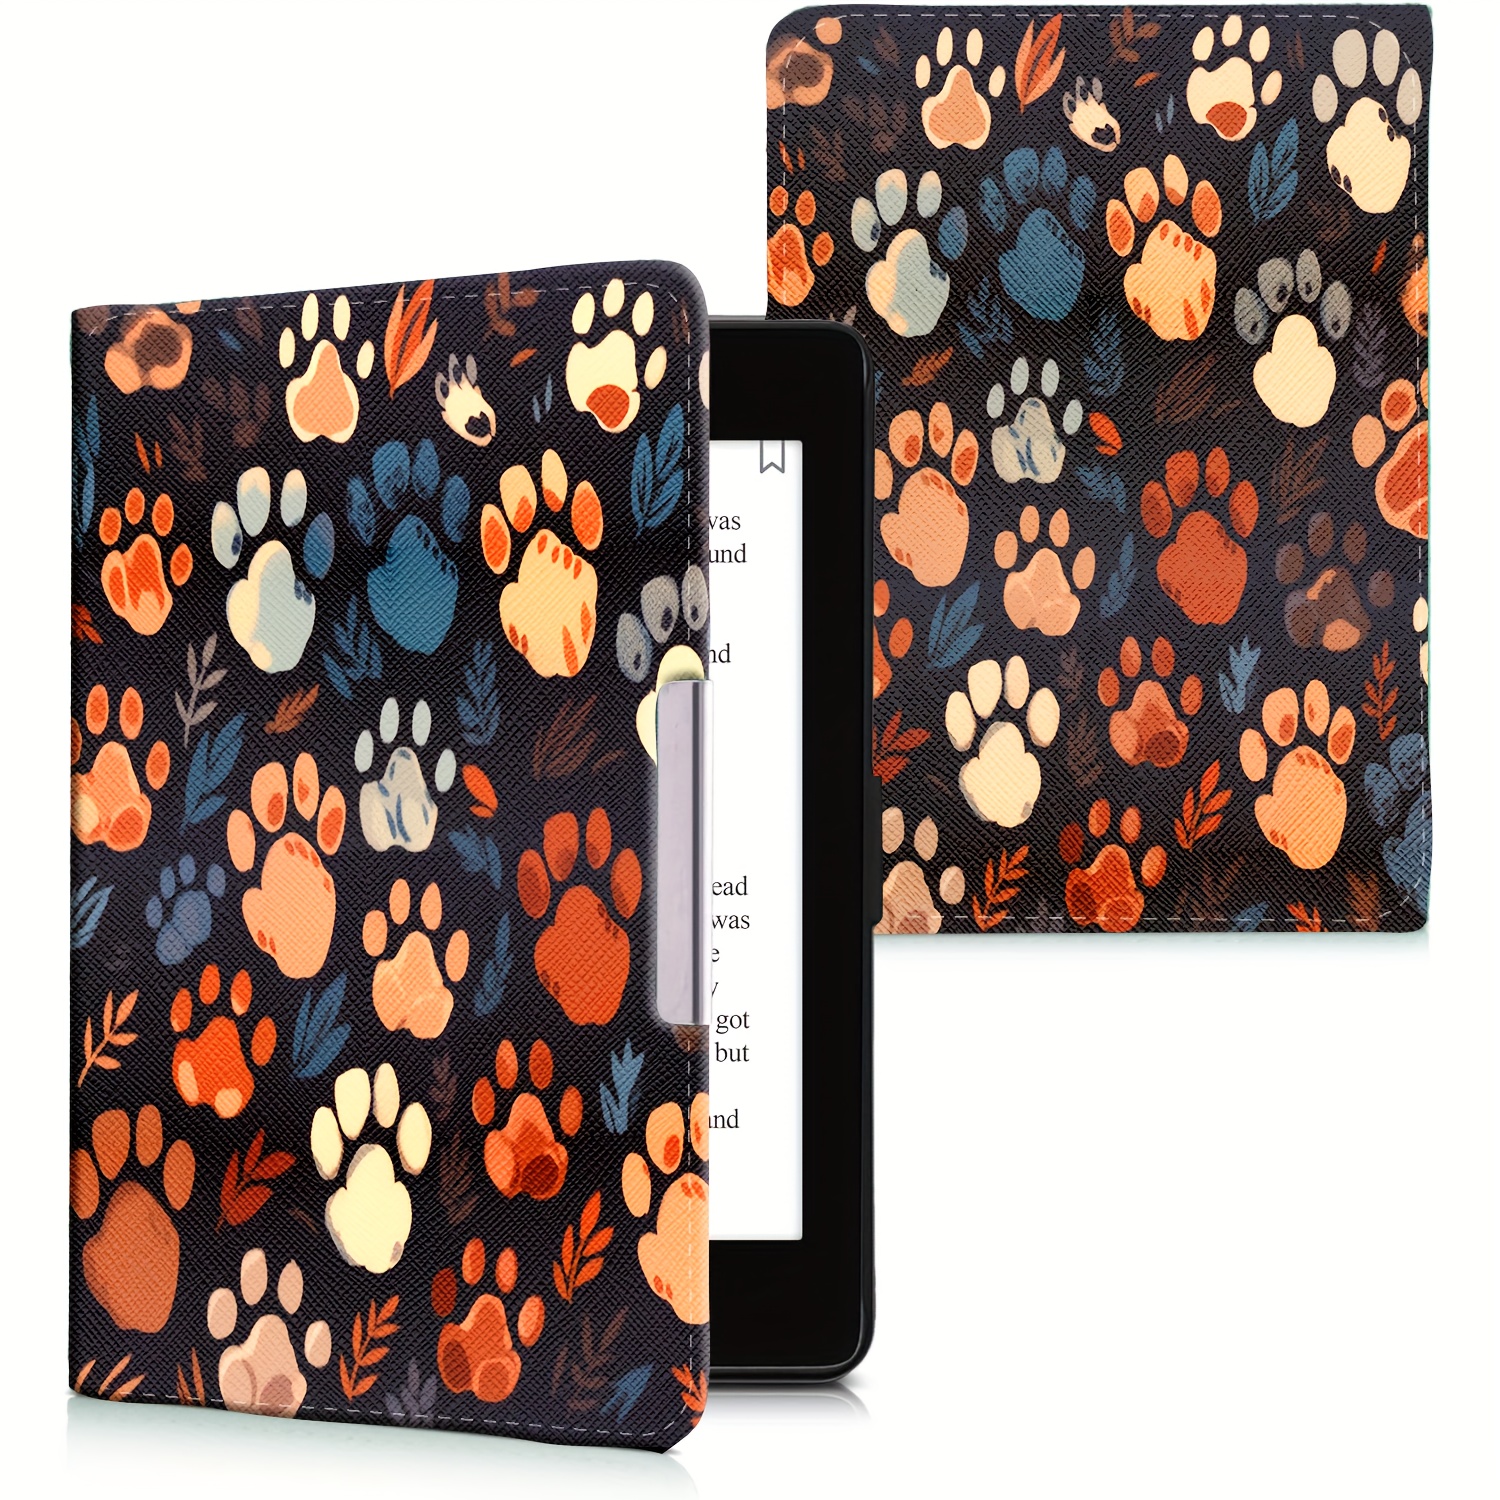 Kindle 7th Generation Case 